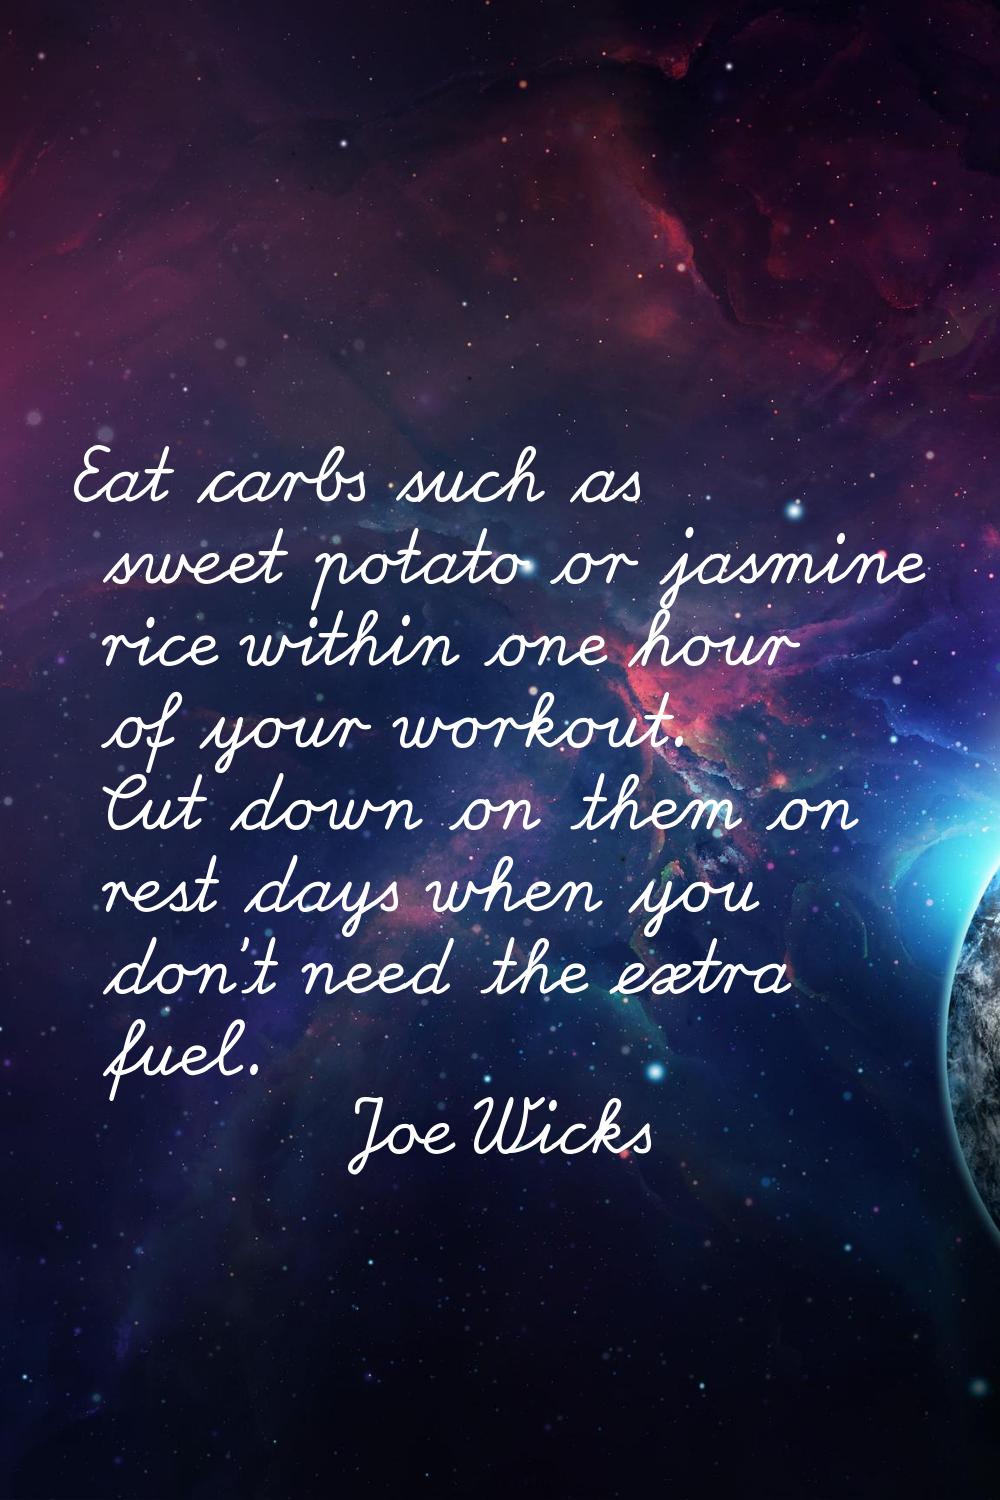 Eat carbs such as sweet potato or jasmine rice within one hour of your workout. Cut down on them on